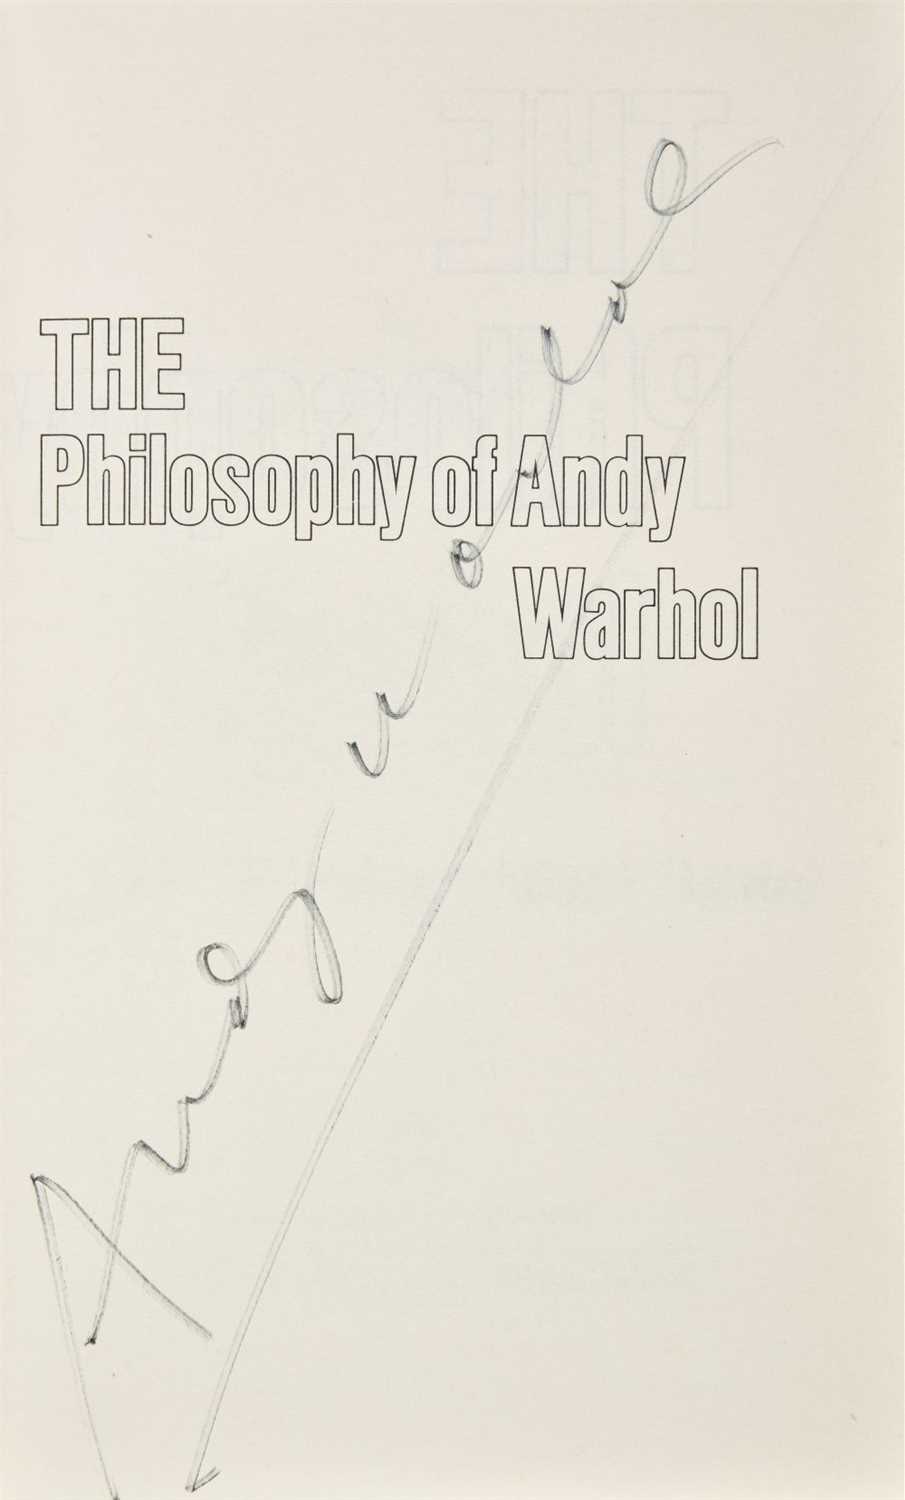 Lot 365 - Warhol (Andy, 1928-1987). The Philosophy of Andy Warhol, 1st UK edition, 1975